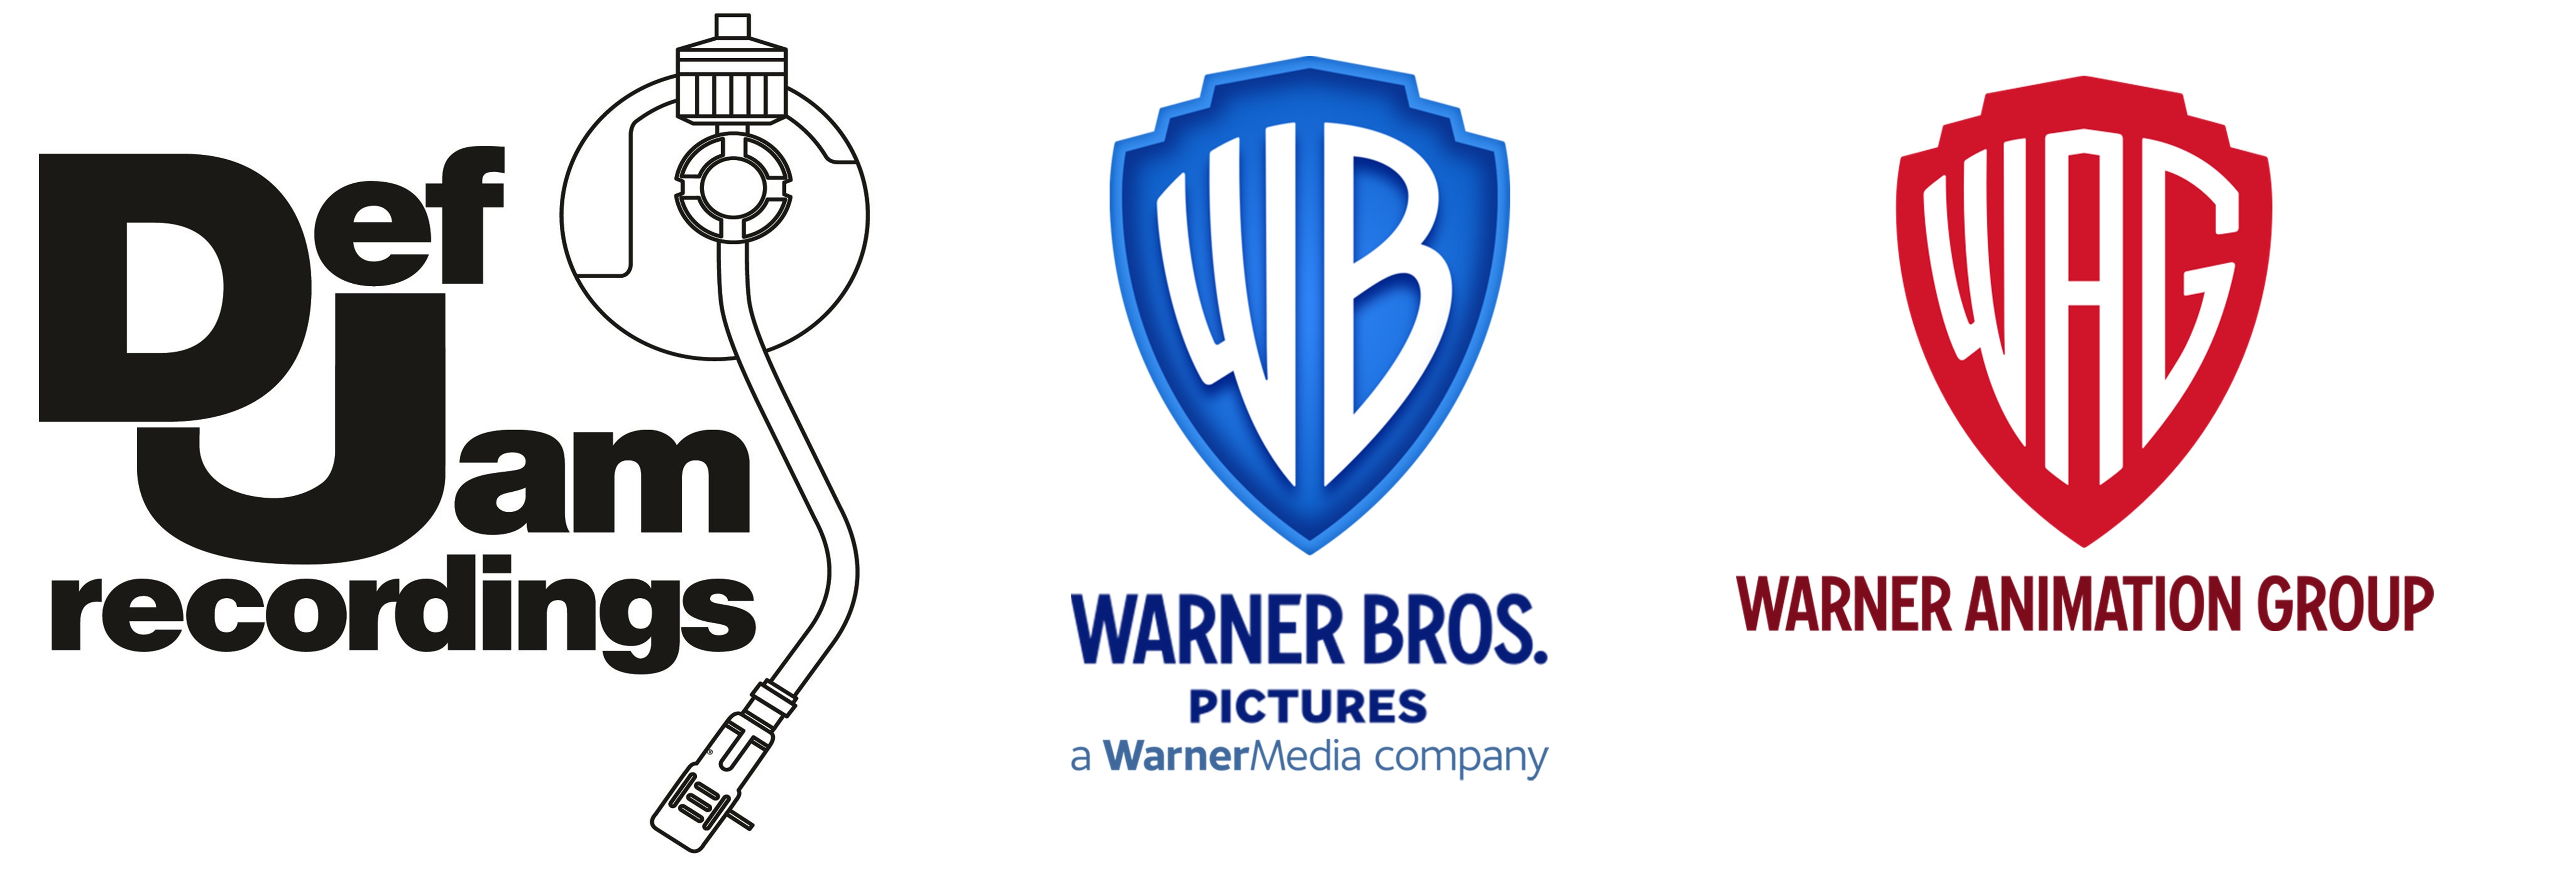  Def जाम Recordings, Warner Bros. Pictures And Warner एनीमेशन Group